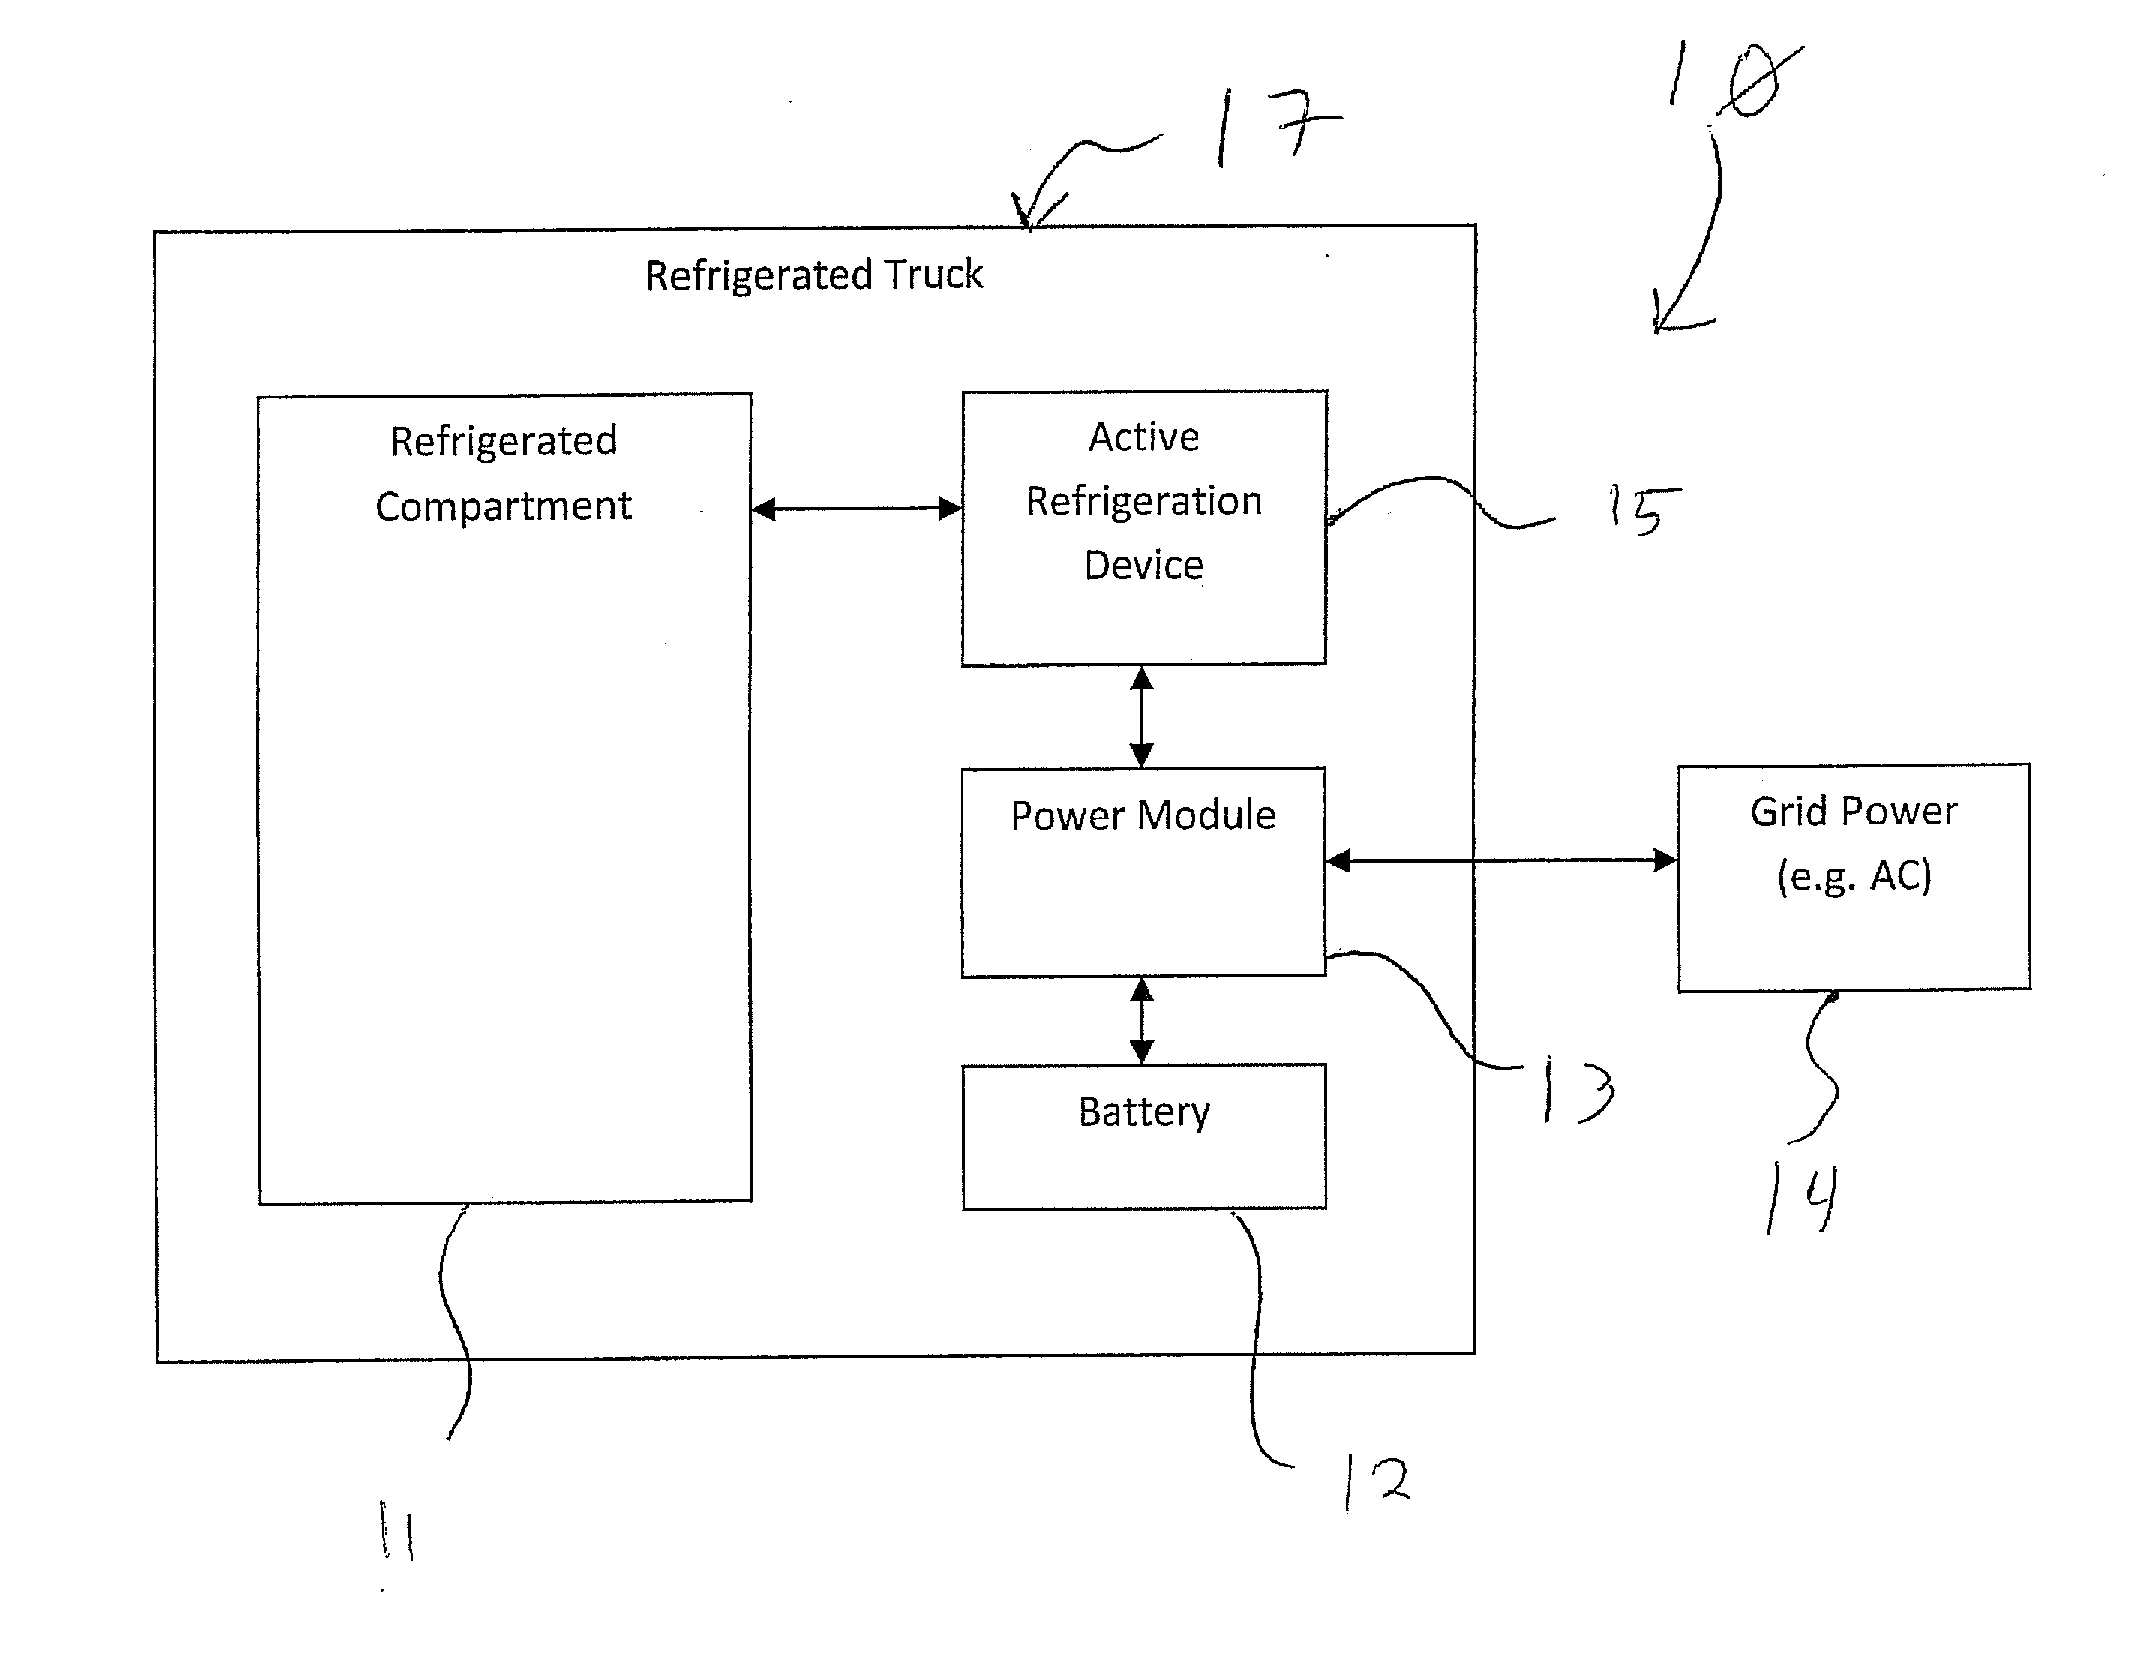 Refrigerated truck battery back-up system and related methods